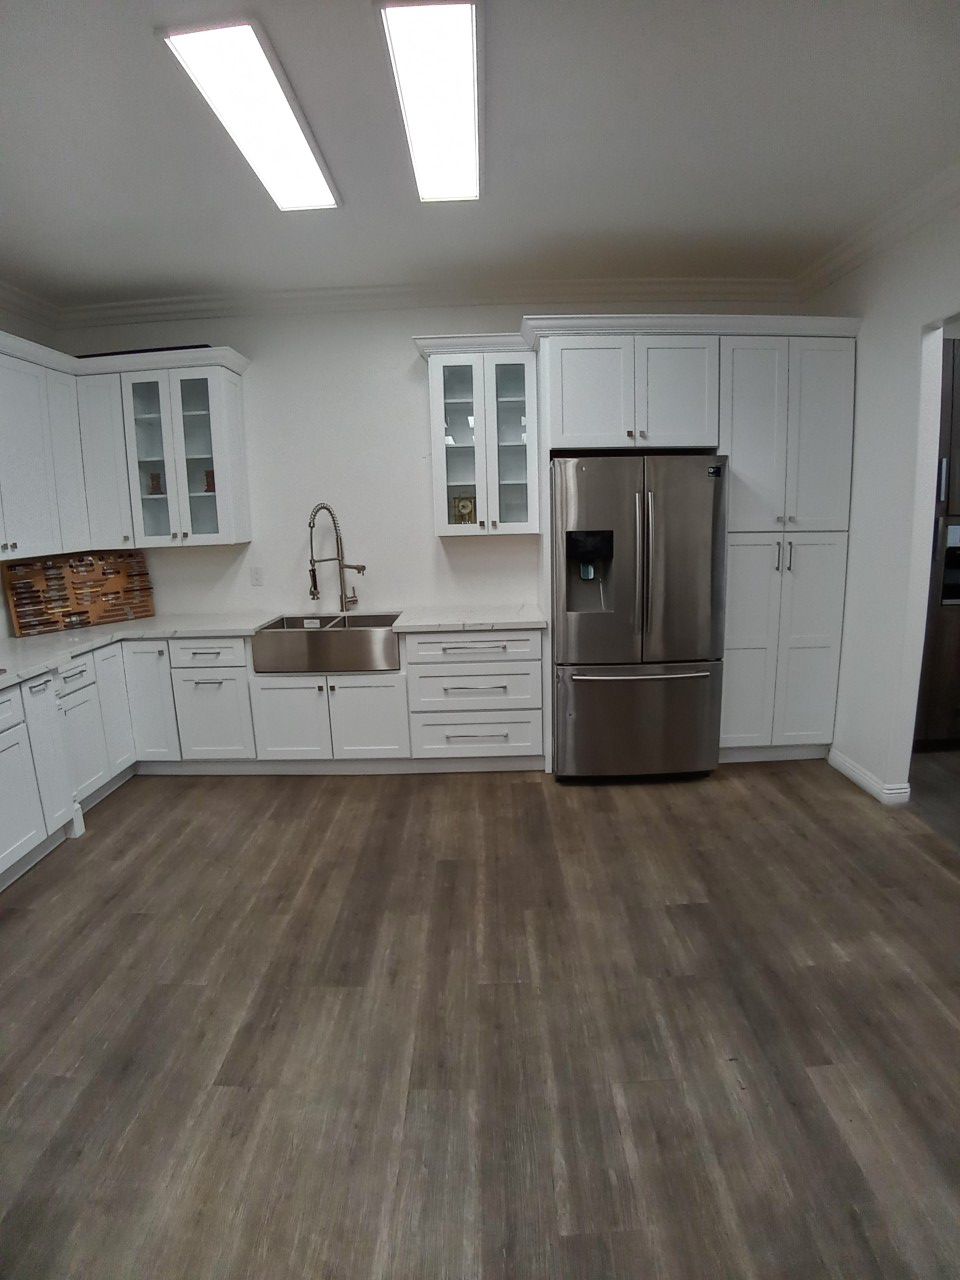 Kitchen cabinets low prices